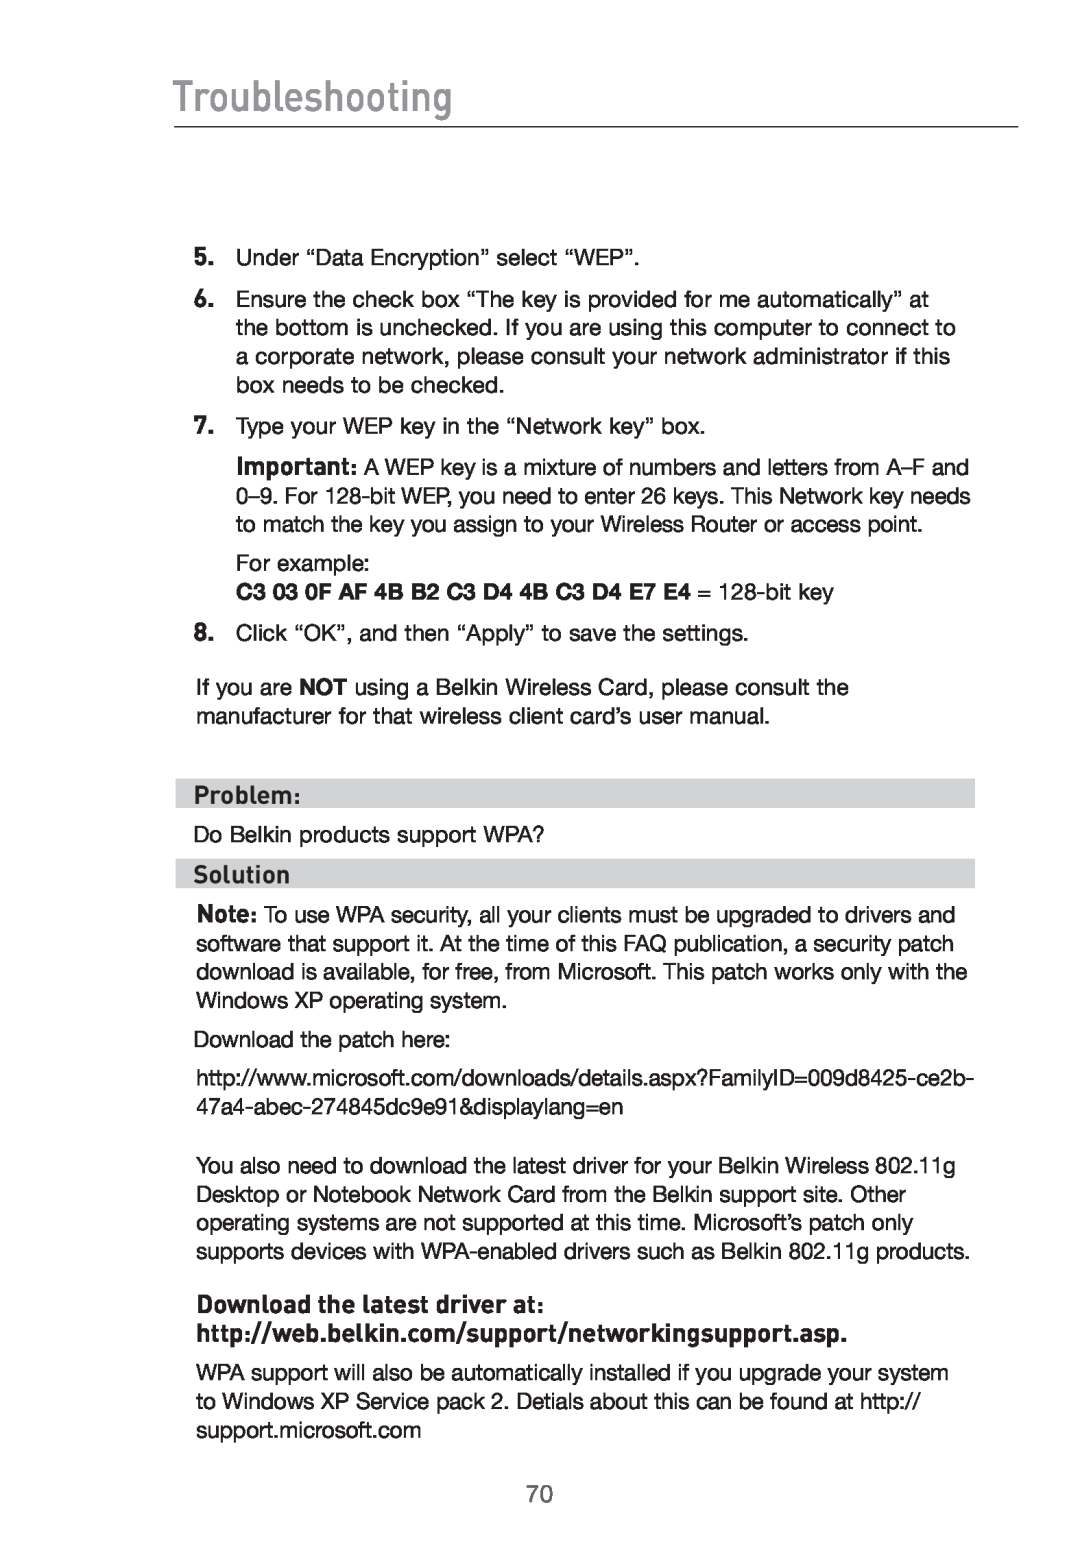 Belkin Pre-N manual Troubleshooting, Problem, Solution, Under “Data Encryption” select “WEP” 